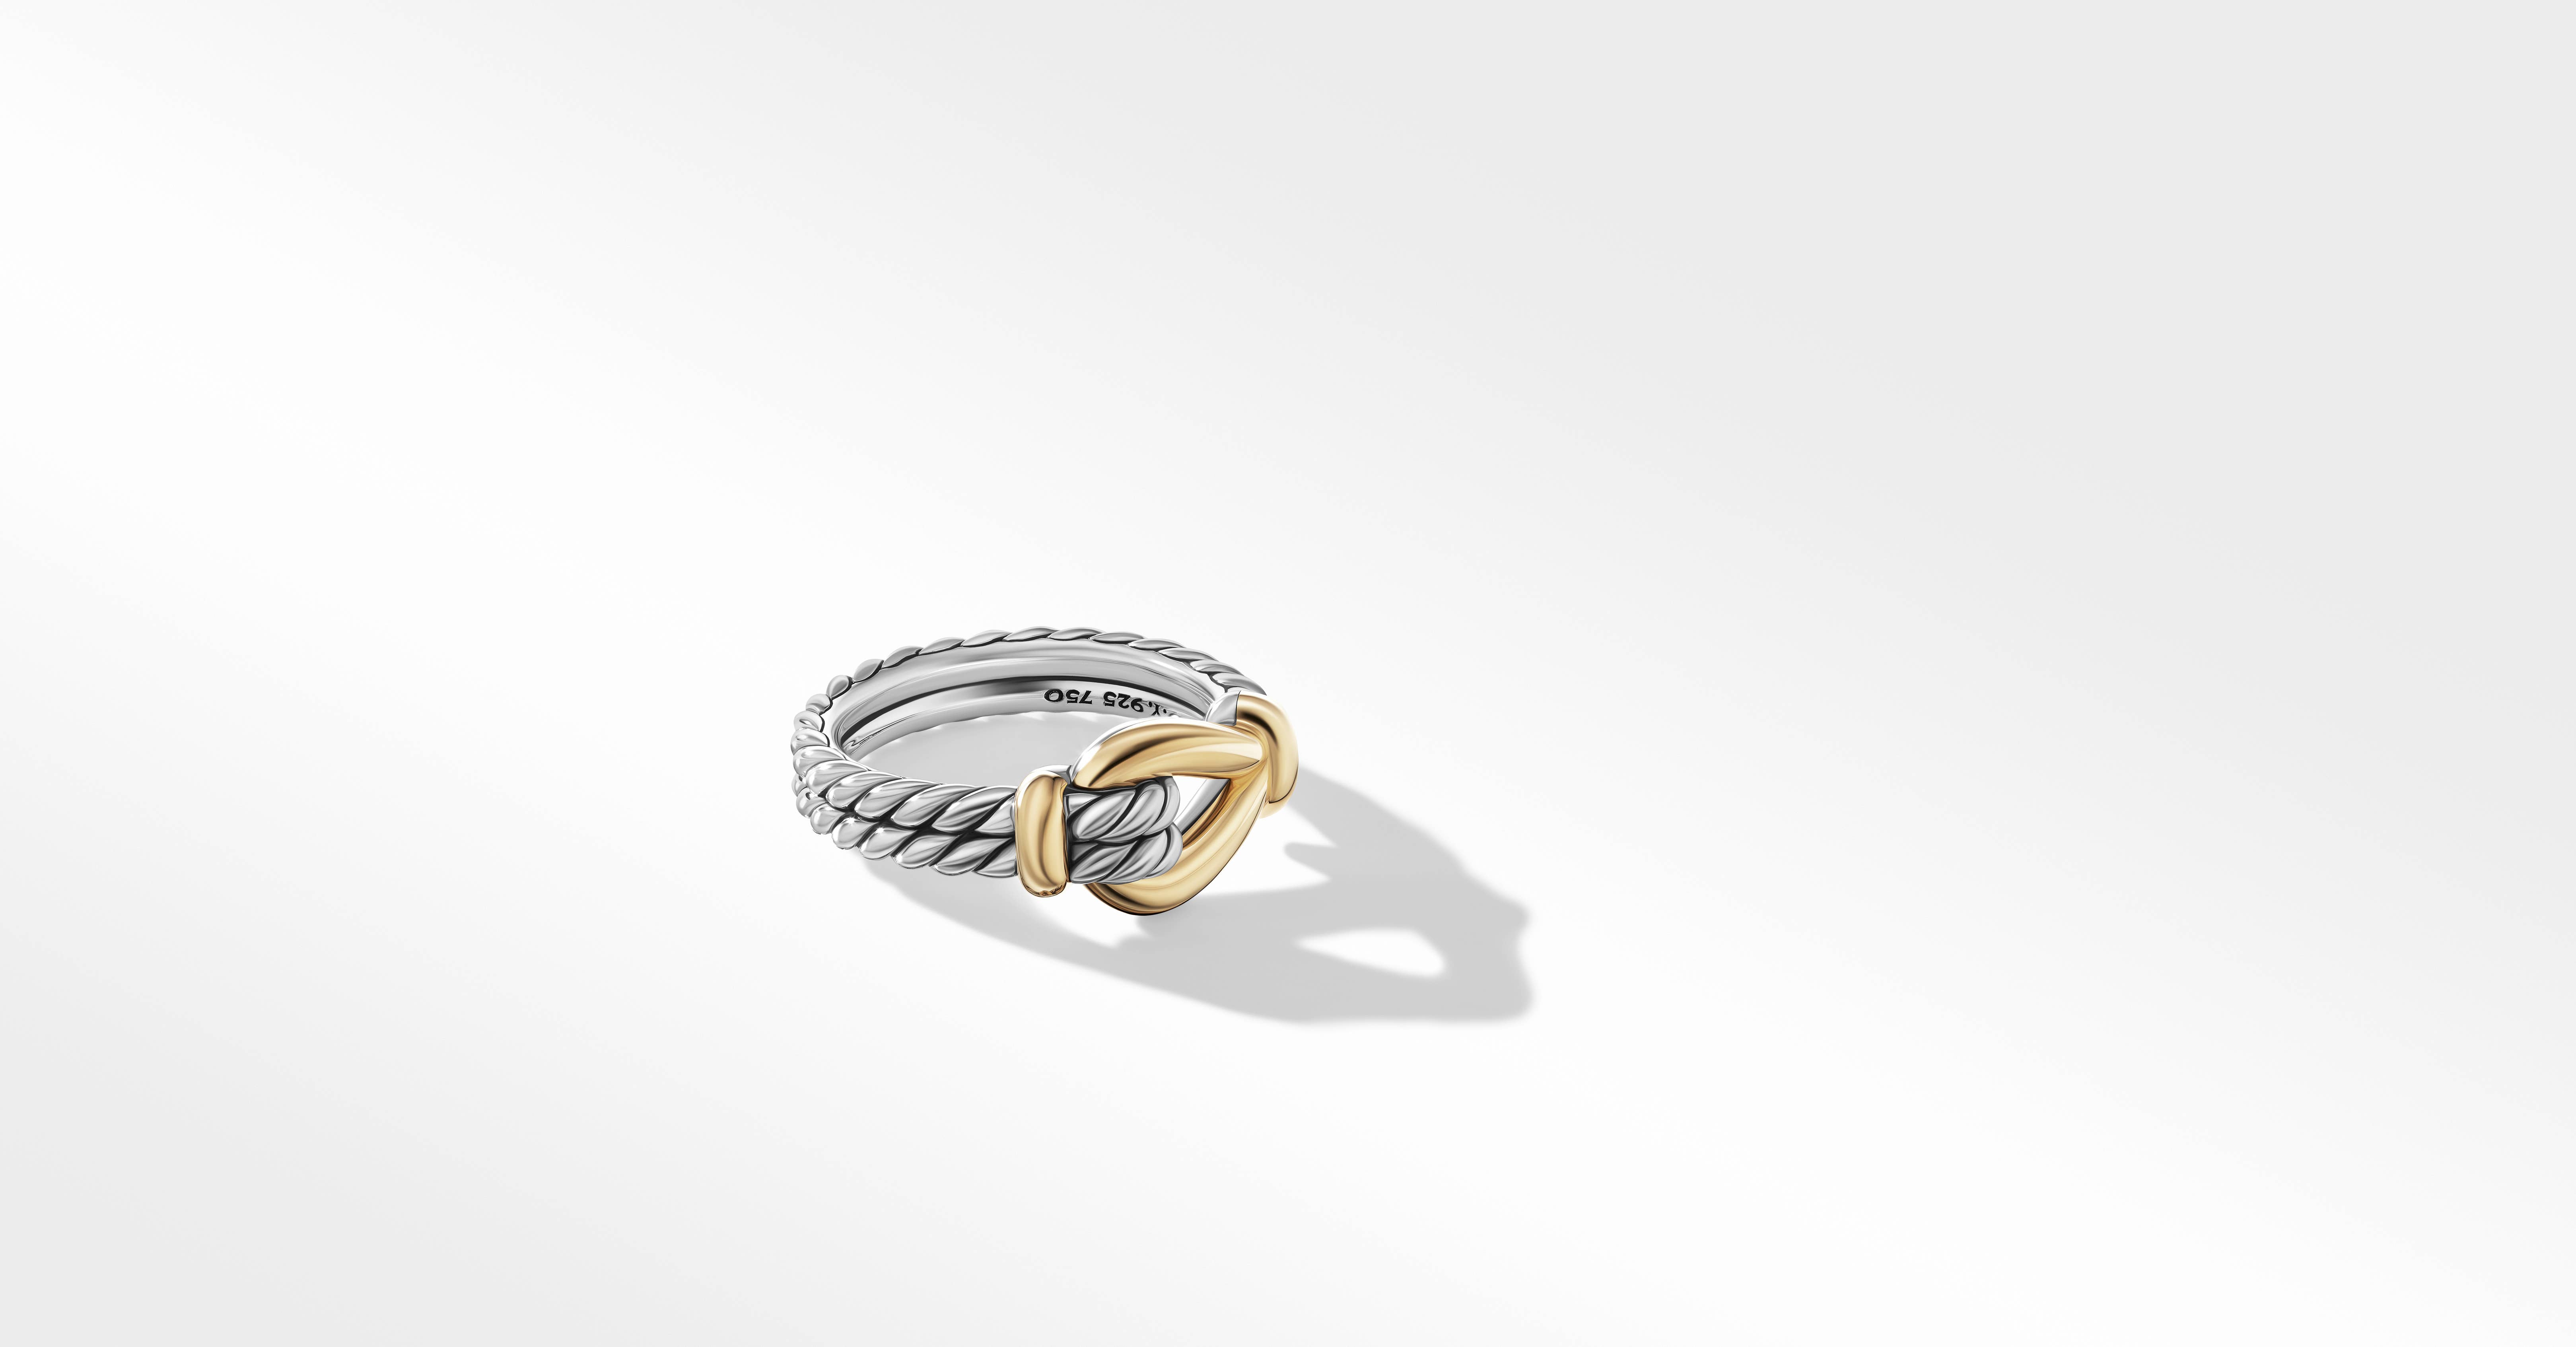 David Yurman | Thoroughbred Loop Ring in Sterling Silver with 18K Yellow Gold